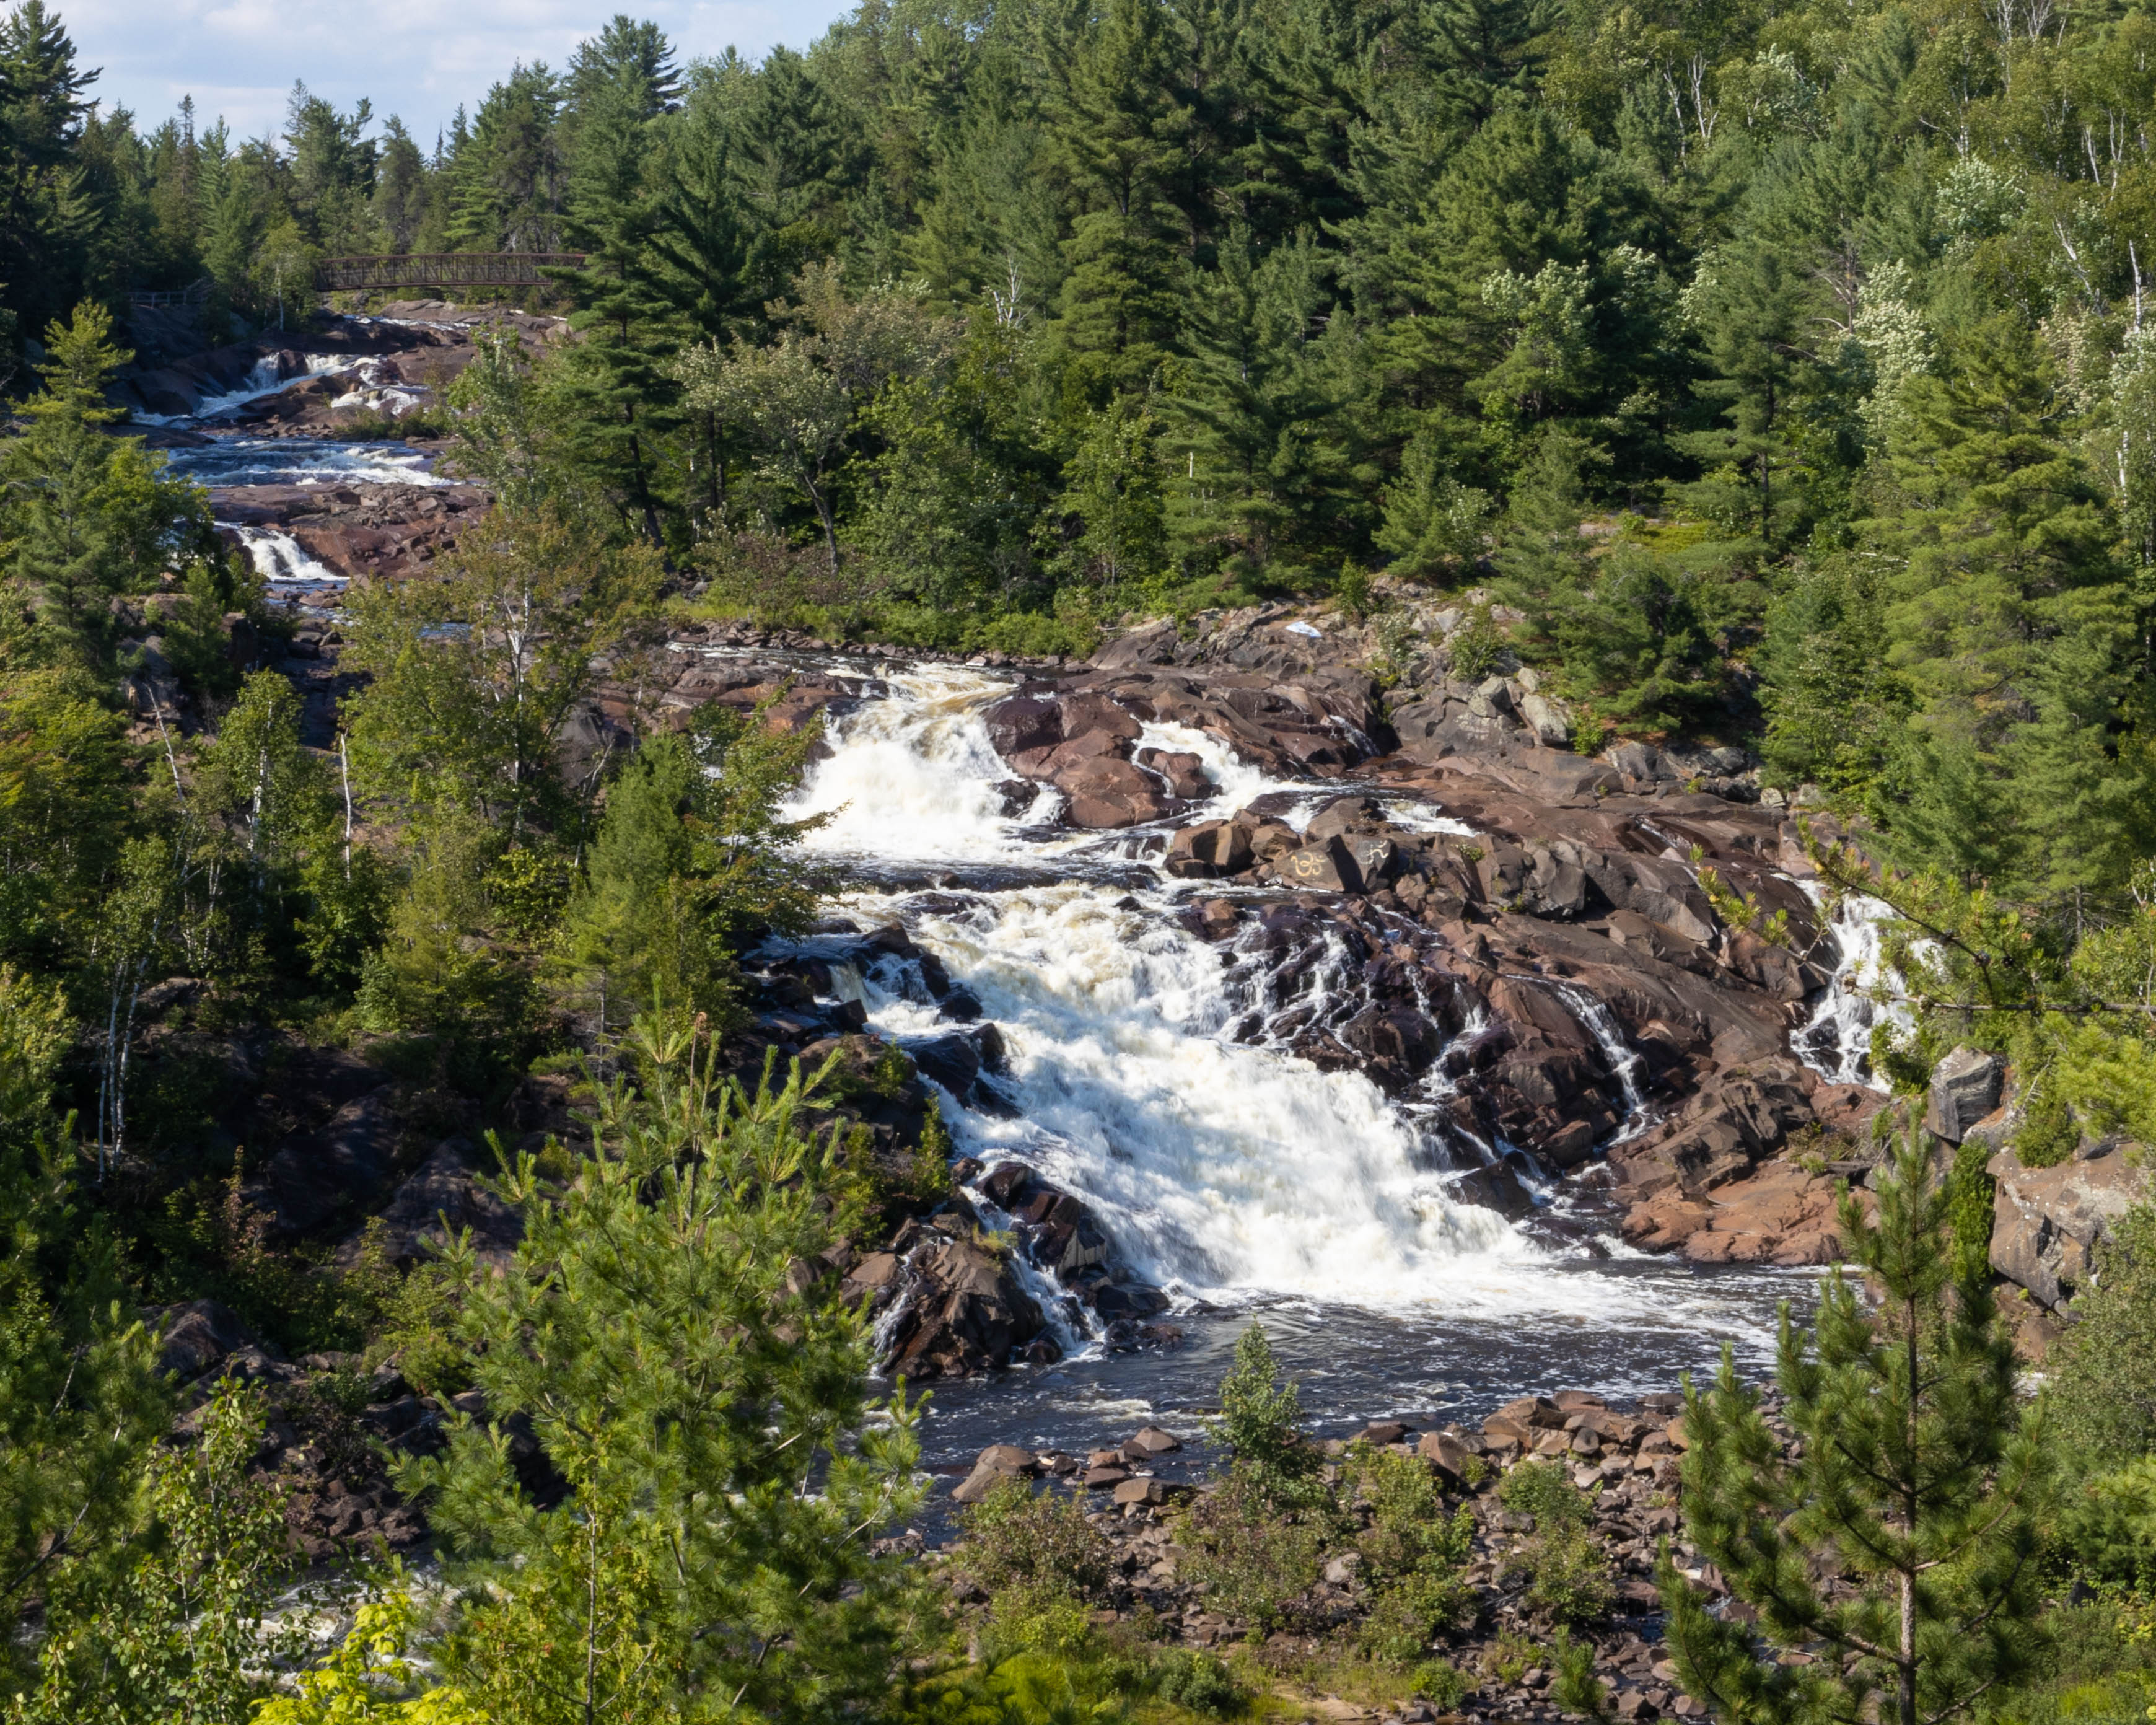 High Falls; a long tumbling waterfall down a rocky riverbed surrounded by thick pine forest.